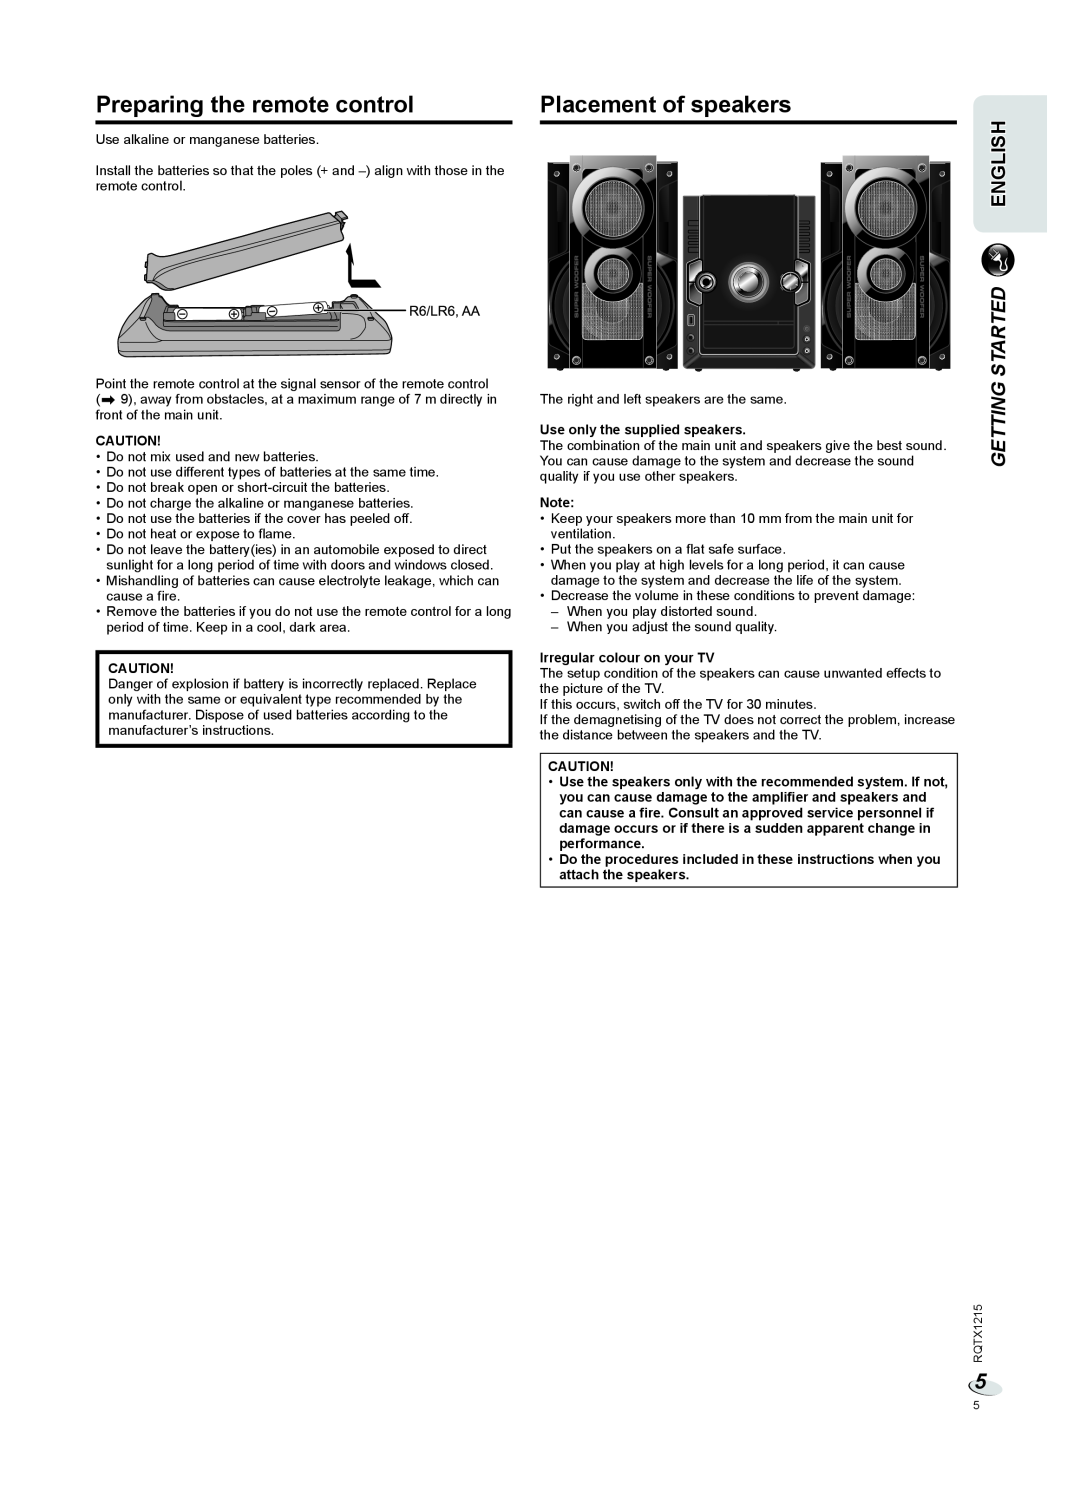 Panasonic SC-VKX60 operating instructions Preparing the remote control, Placement of speakers, Getting Started, English 